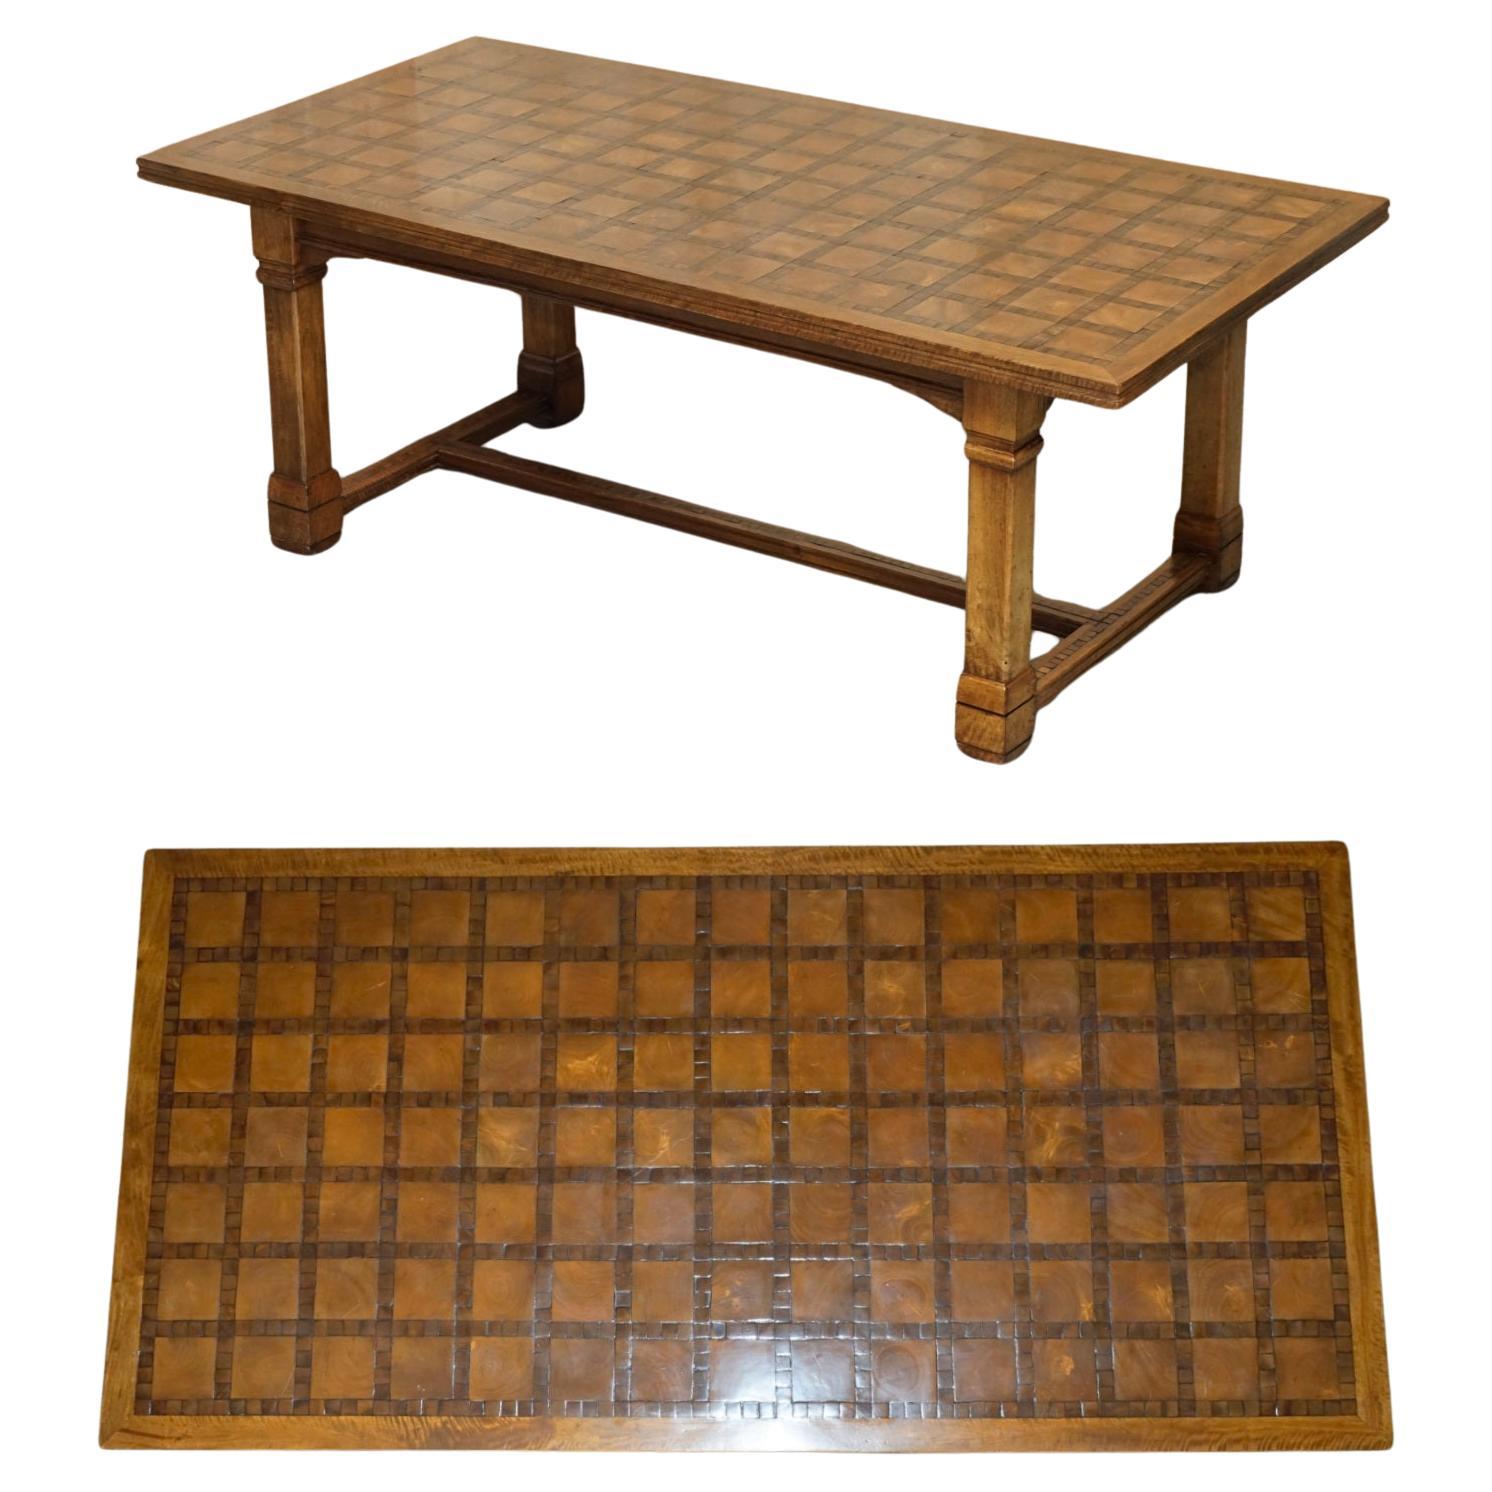 EXQUISITE ViNTAGE OYSTER VENEER & PARQUETRY INLAID REFECTORY DINING TABLE For Sale